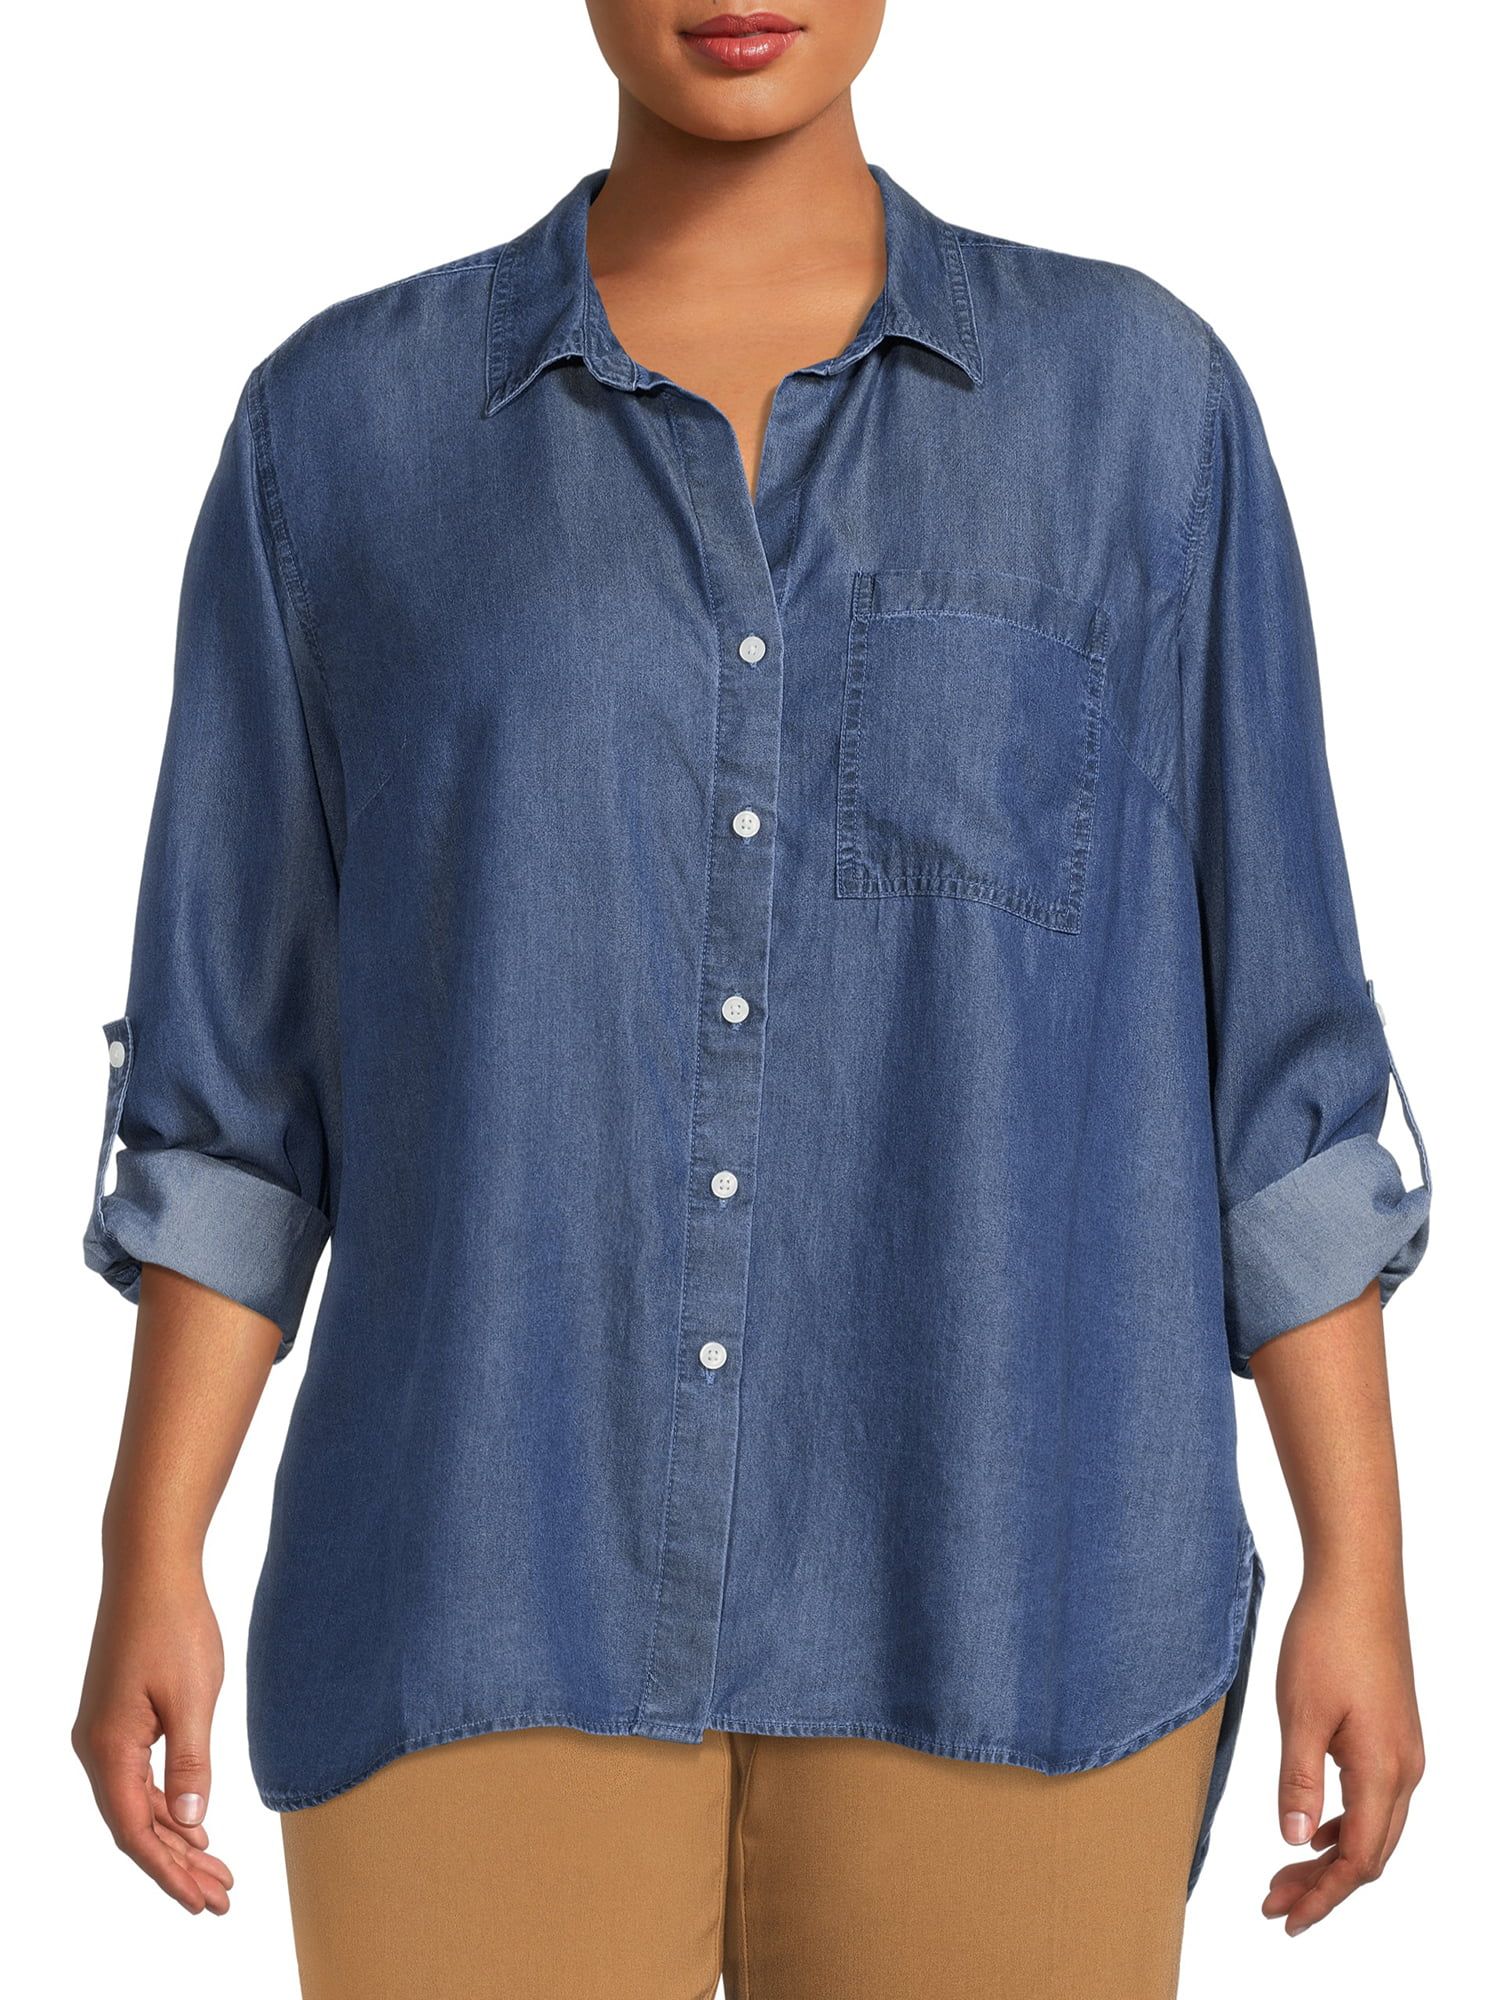 Terra & Sky Women’s Plus Size Button Front Shirt with Long Sleeves | Walmart (US)